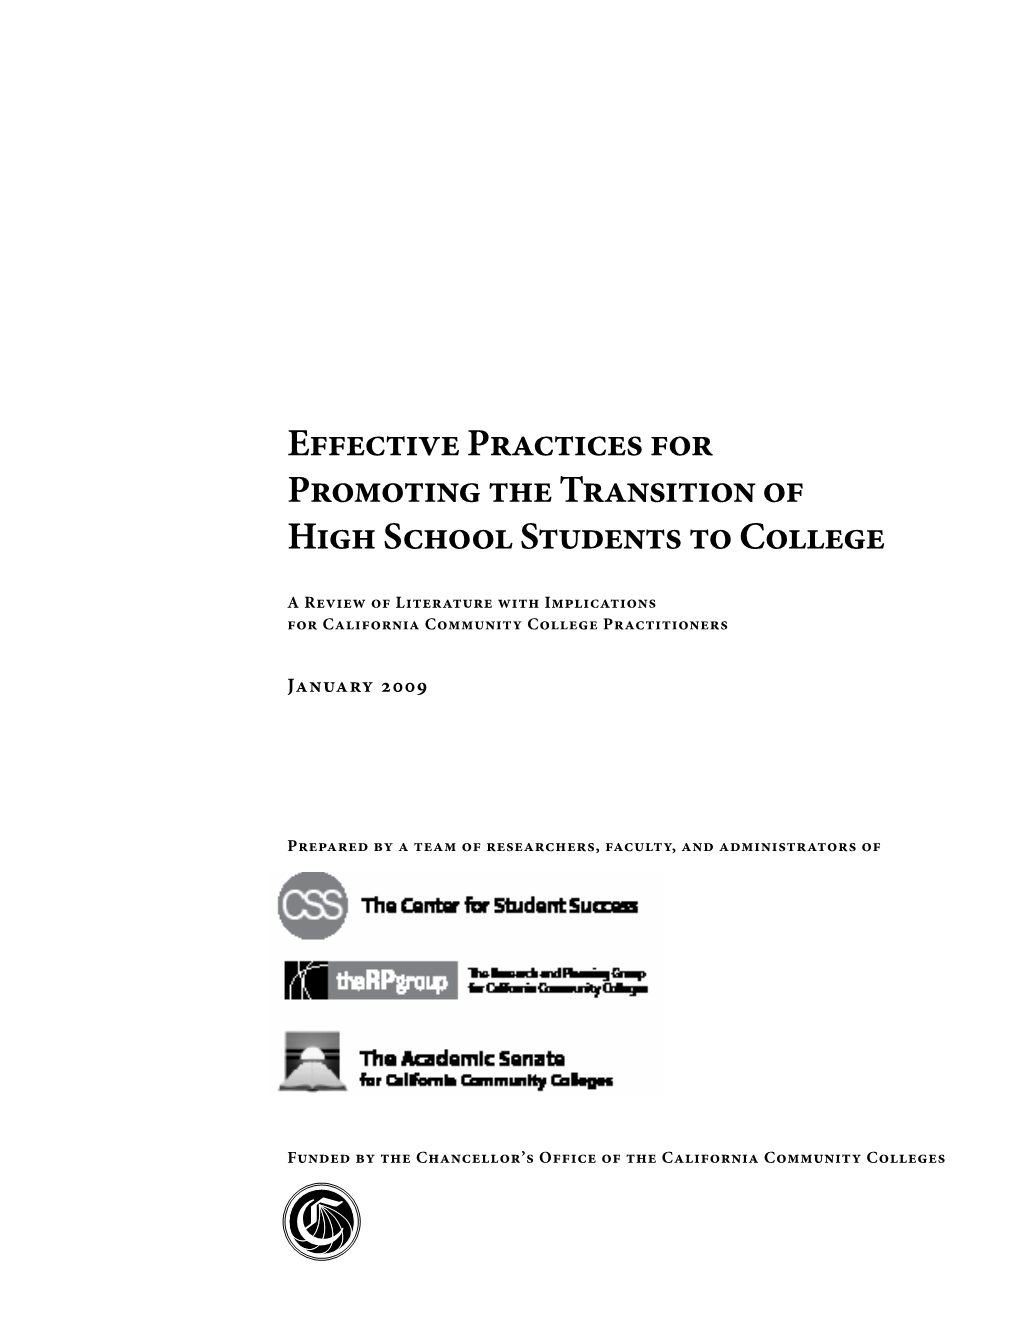 Effective Practices for Promoting the Transition of High School Students to College